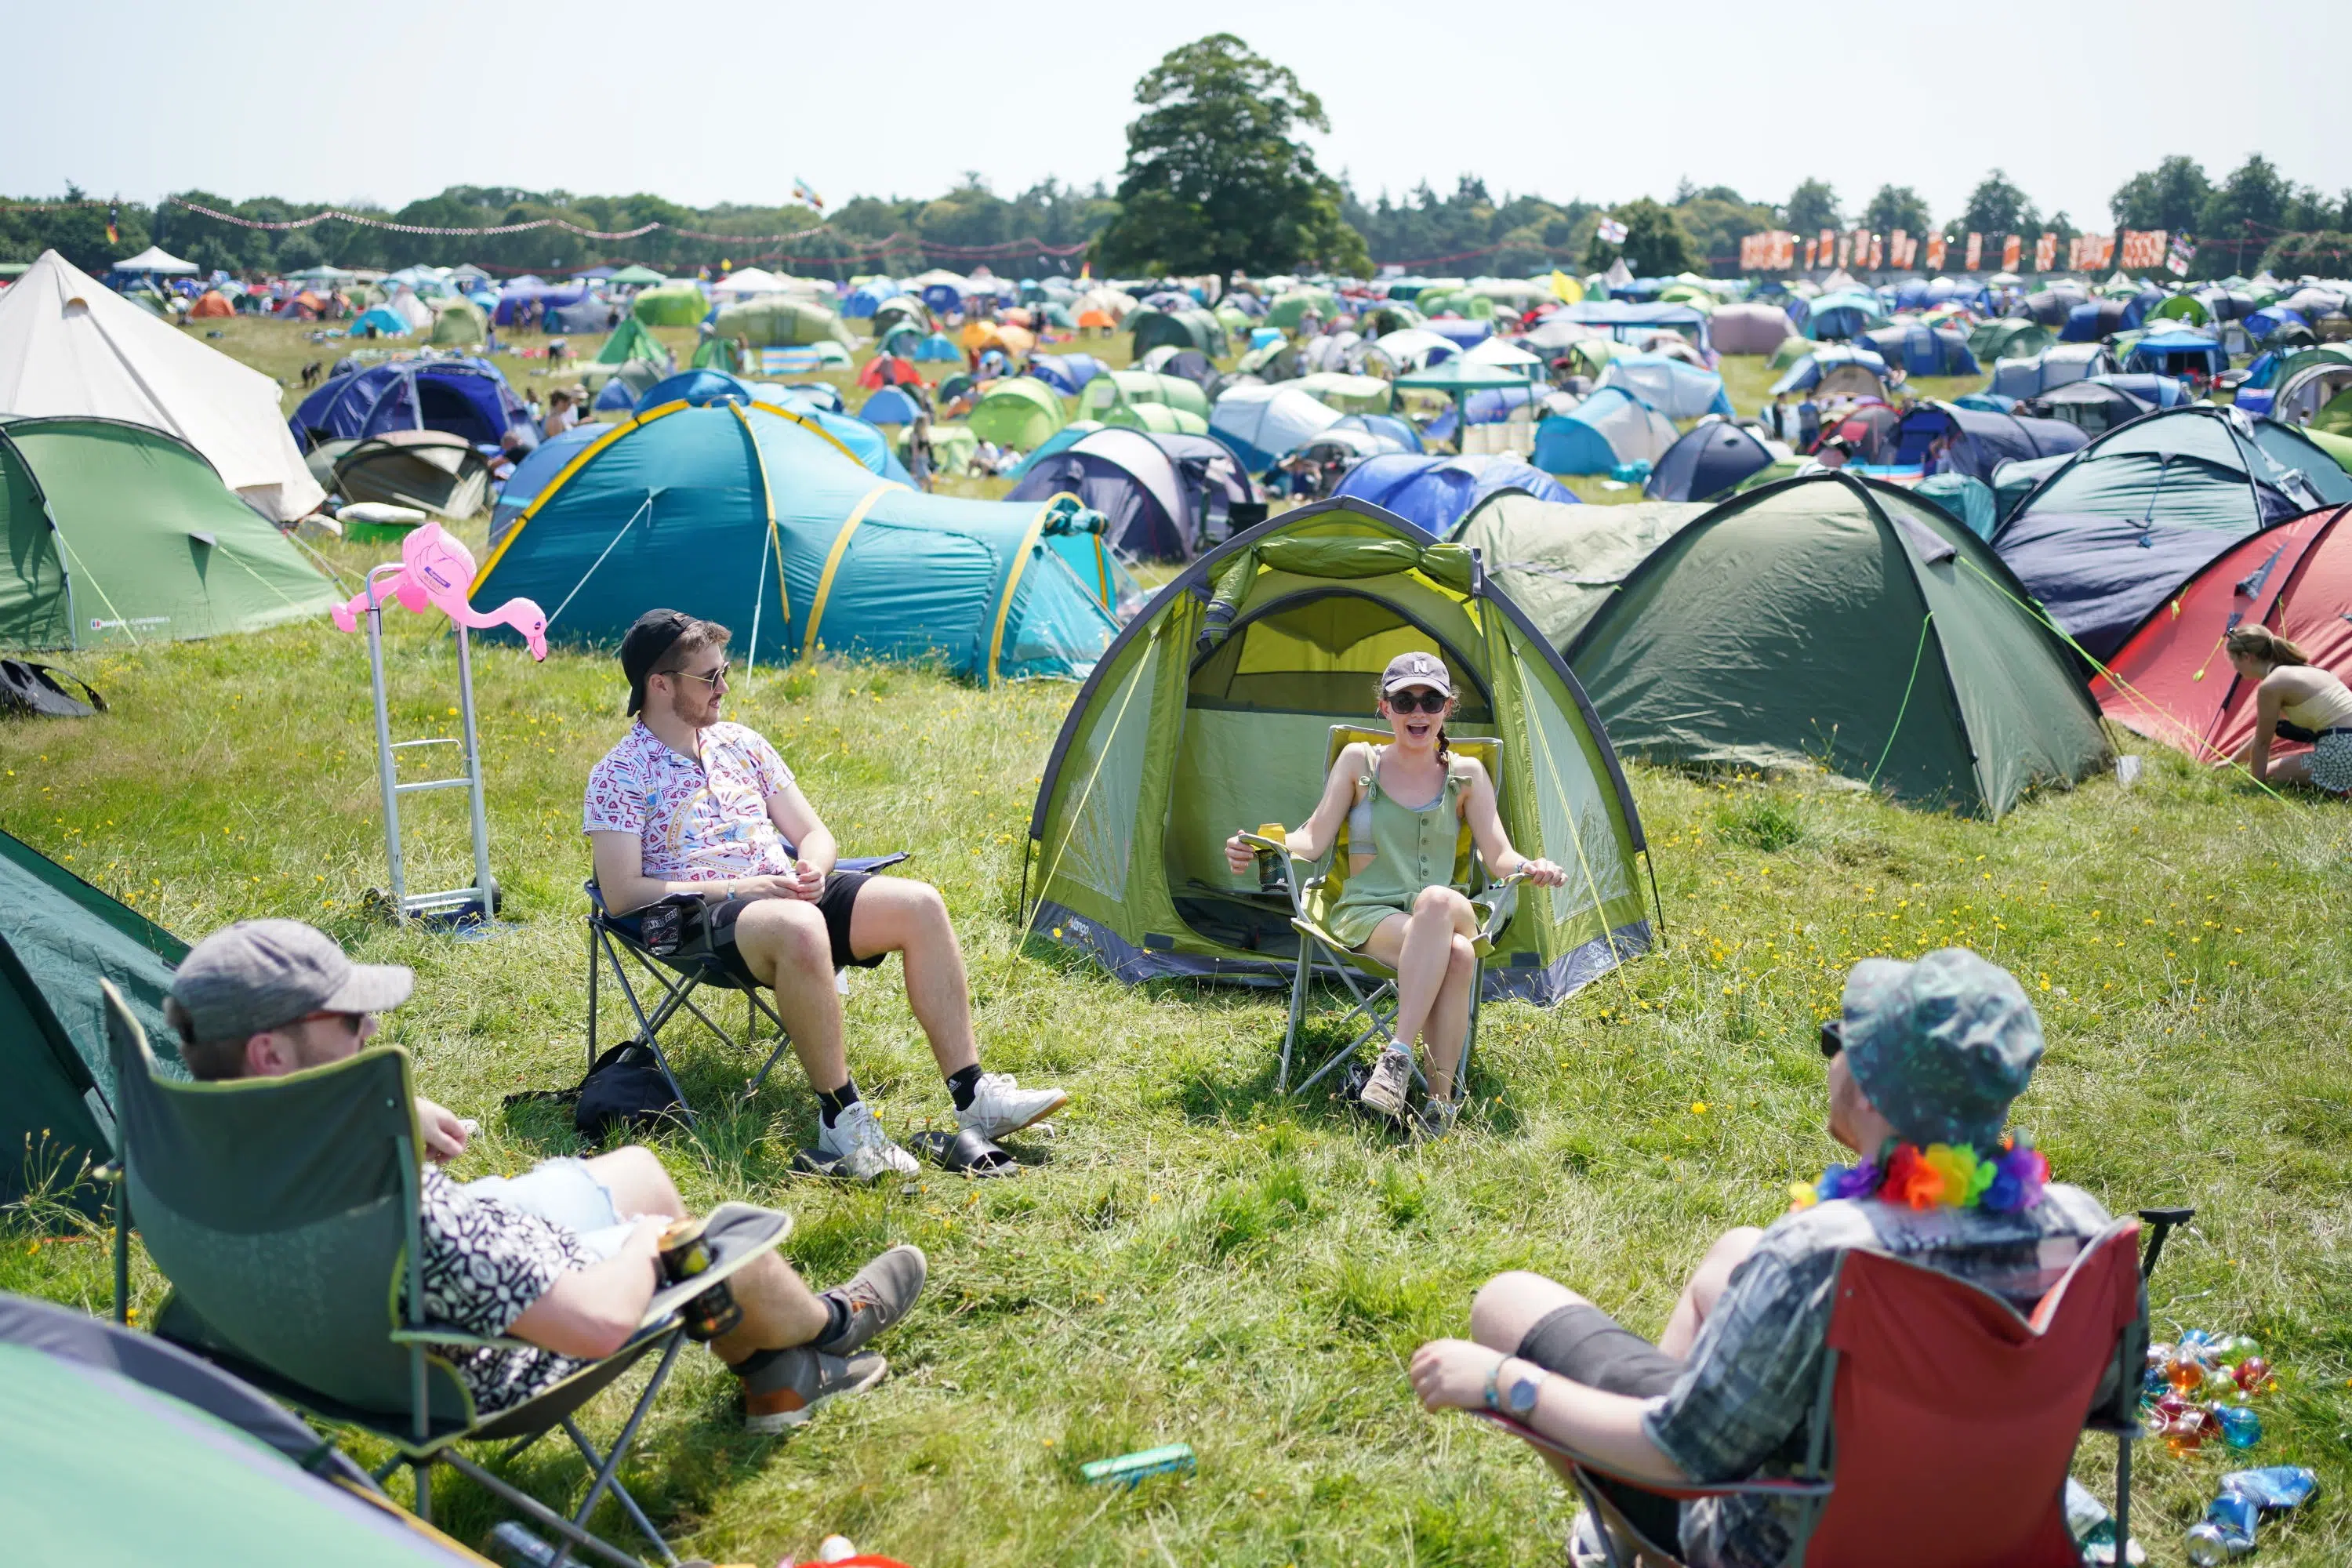 Campers at festival scaled